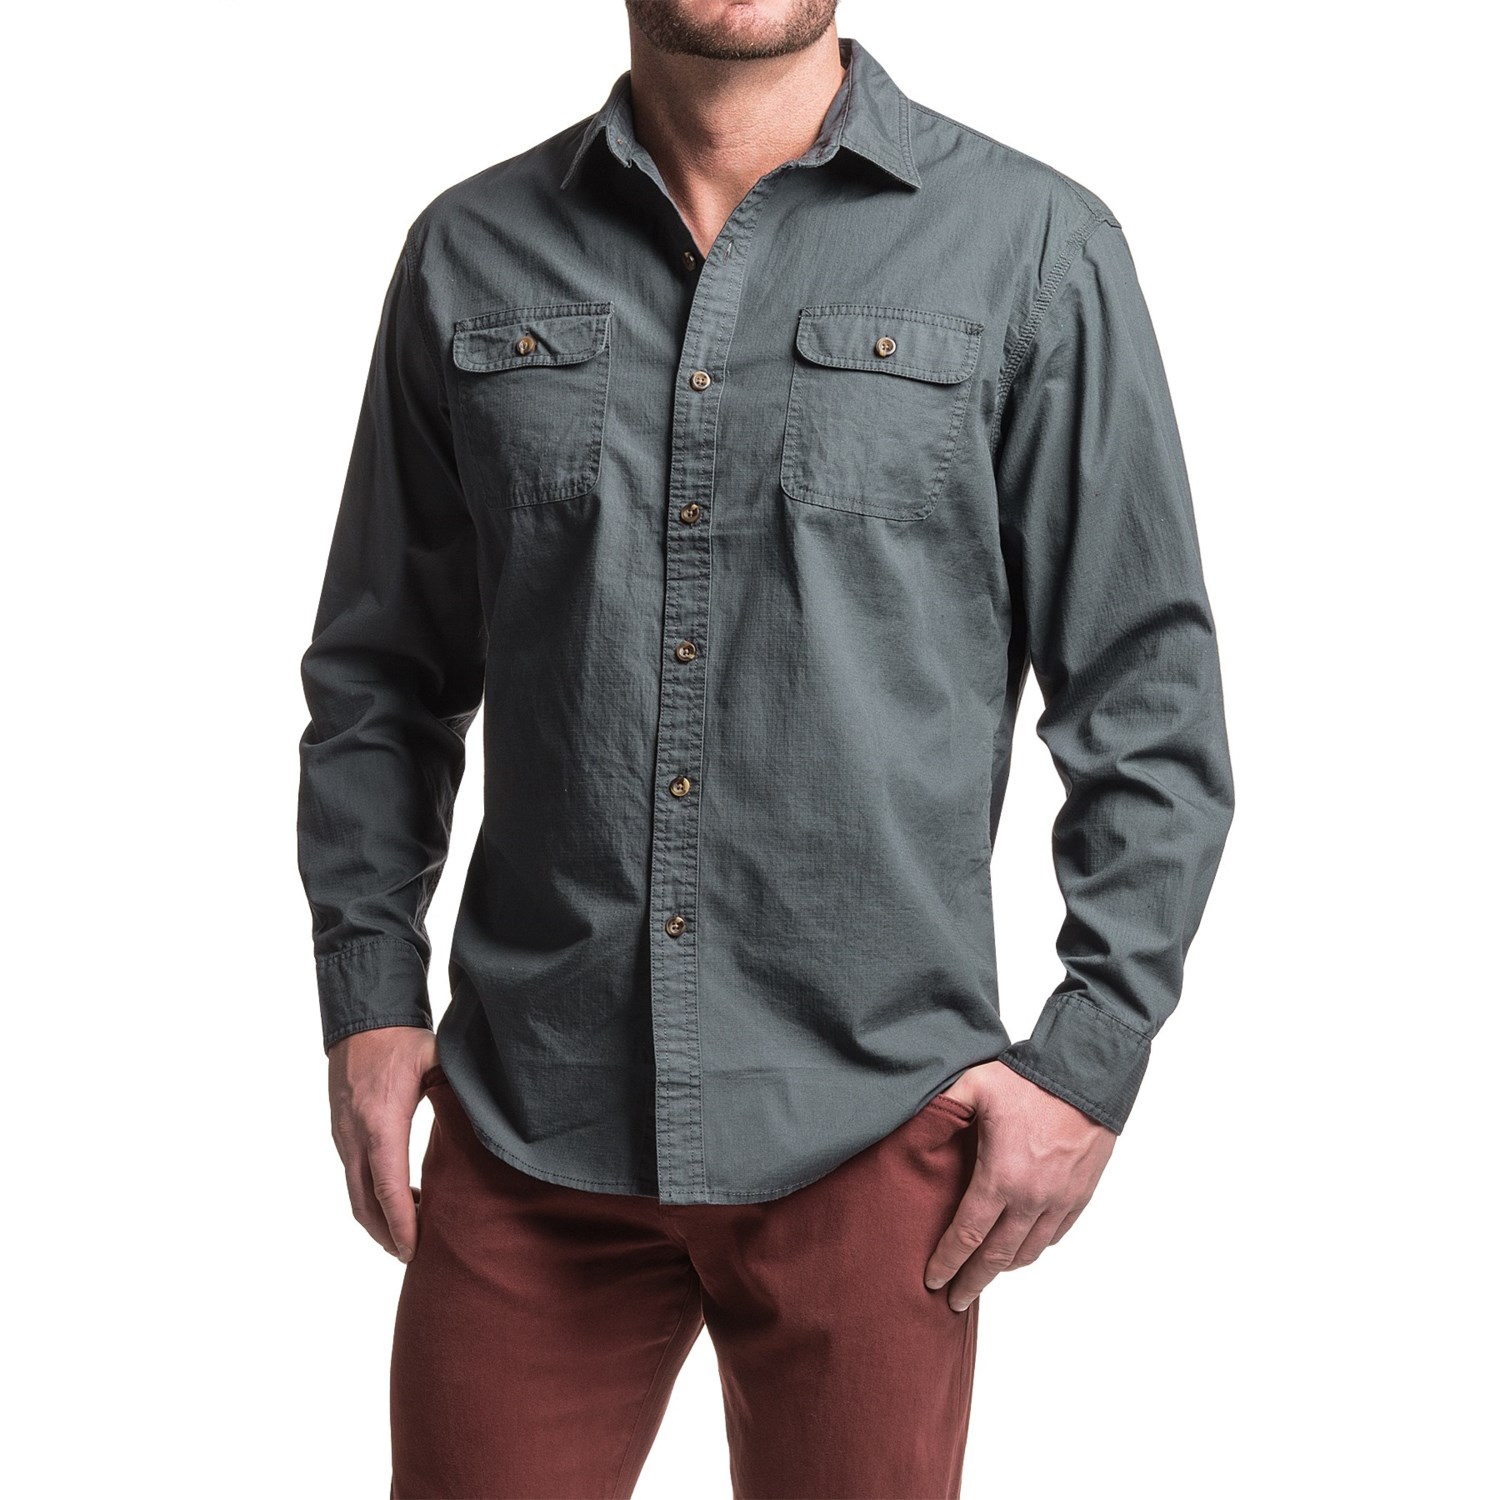 G.H. Bass & Co. Essentials Solid Shirt (For Men) - Save 74%